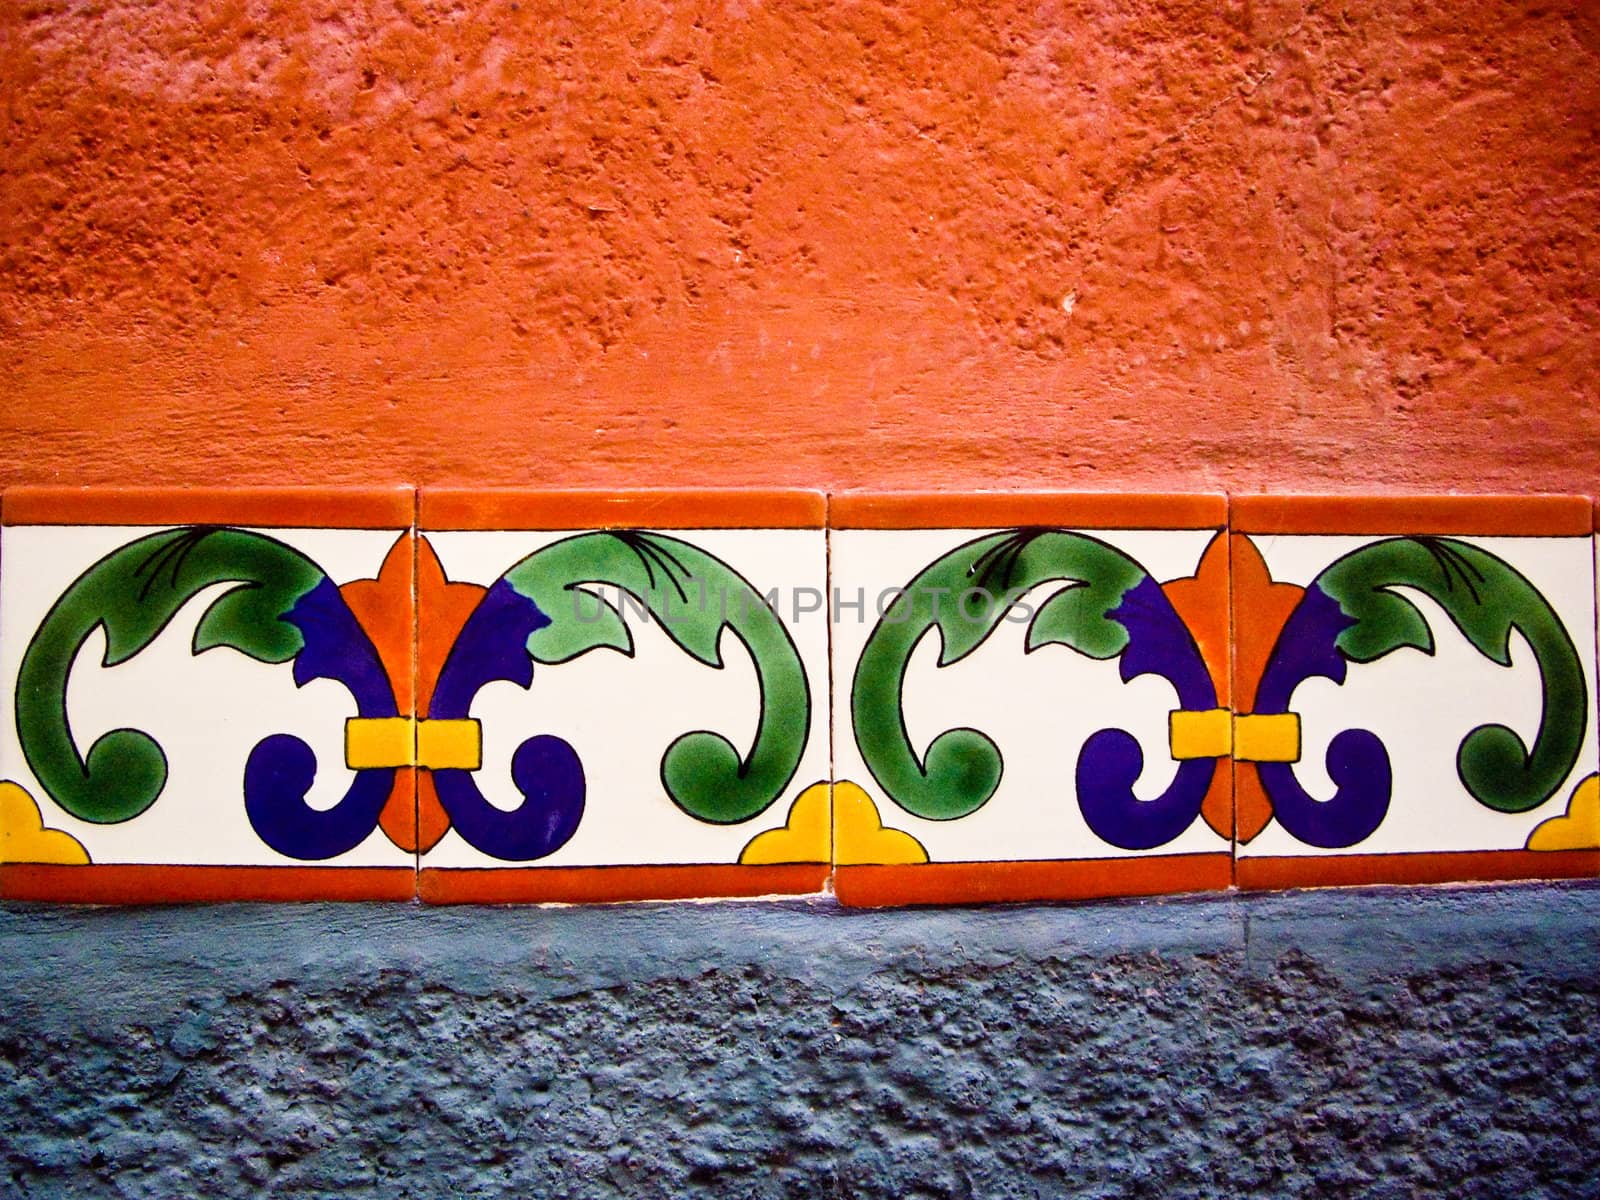 Details of Mexican color tiles on exterior of building